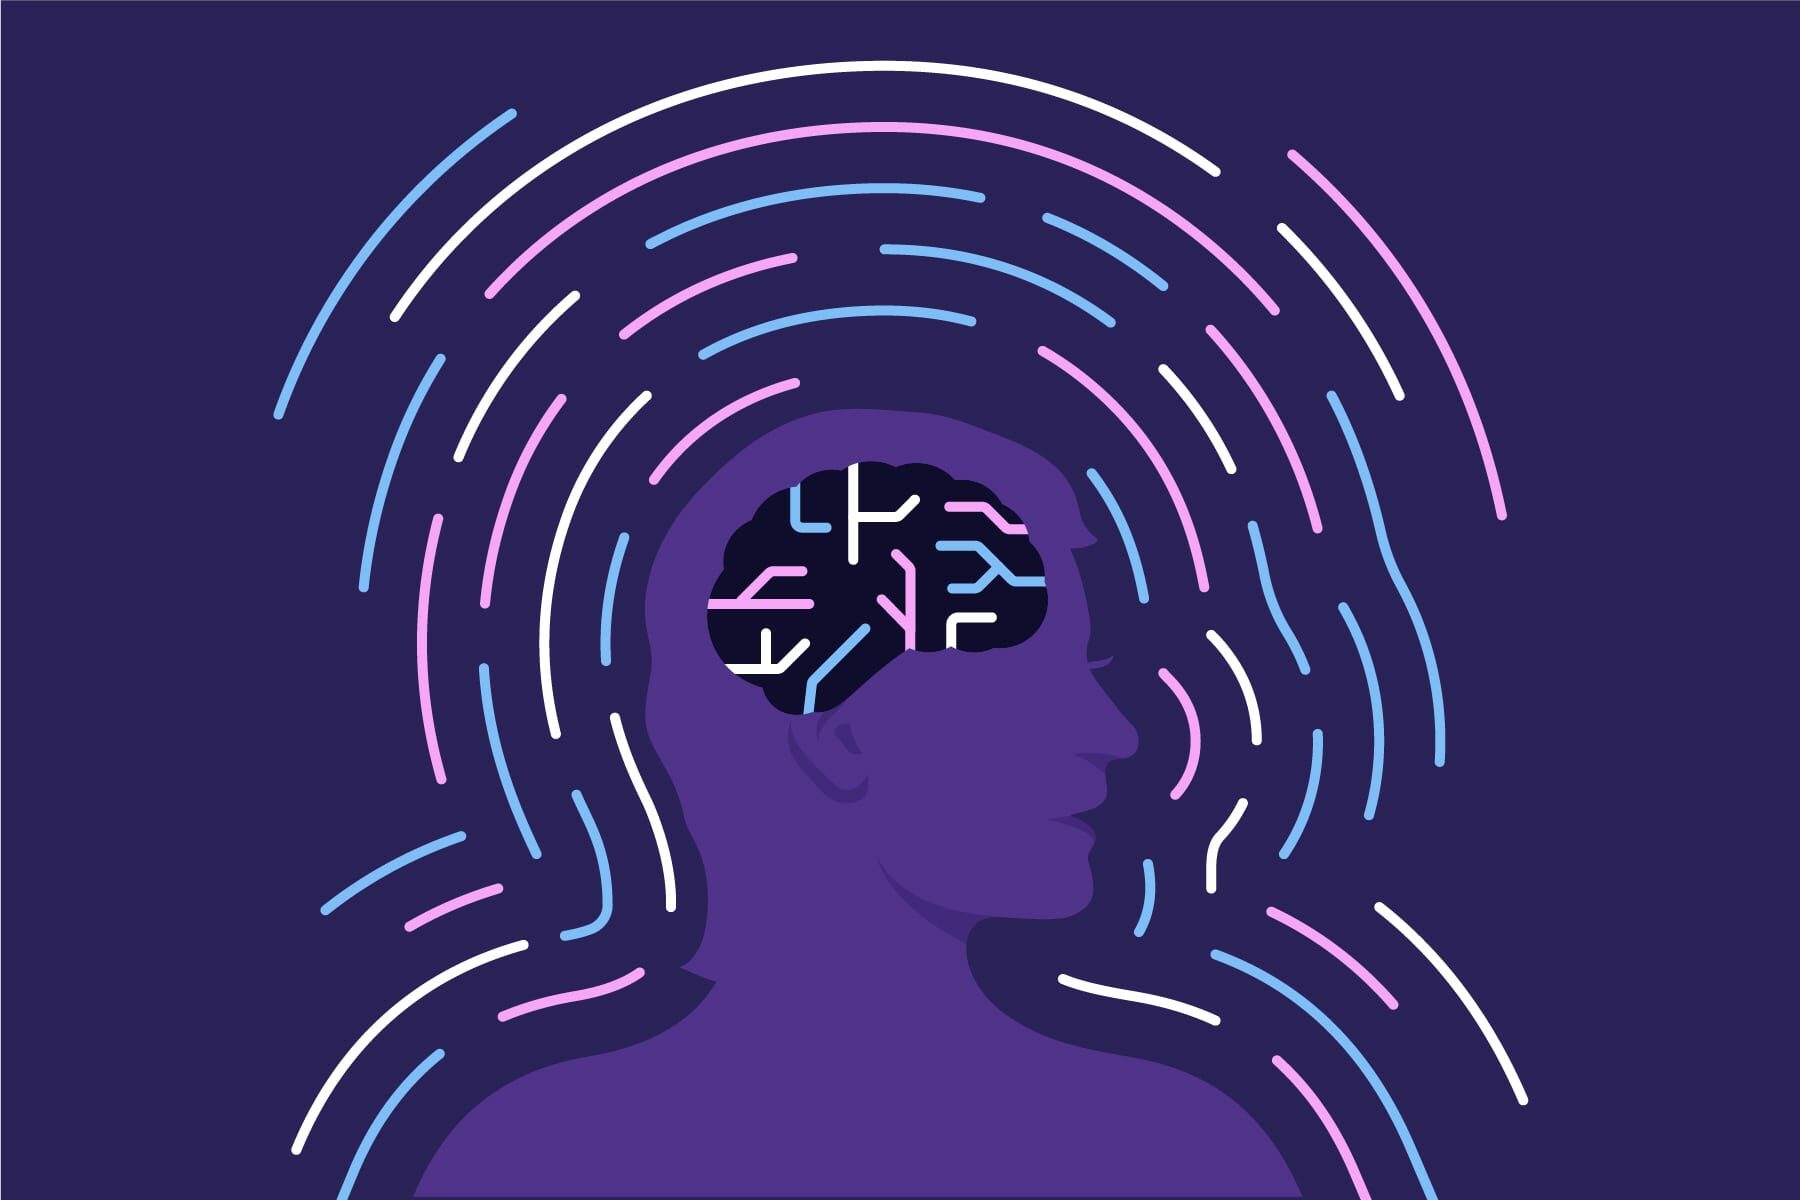 A photo illustration of a person's profile with electric-like currents coming from the brain.